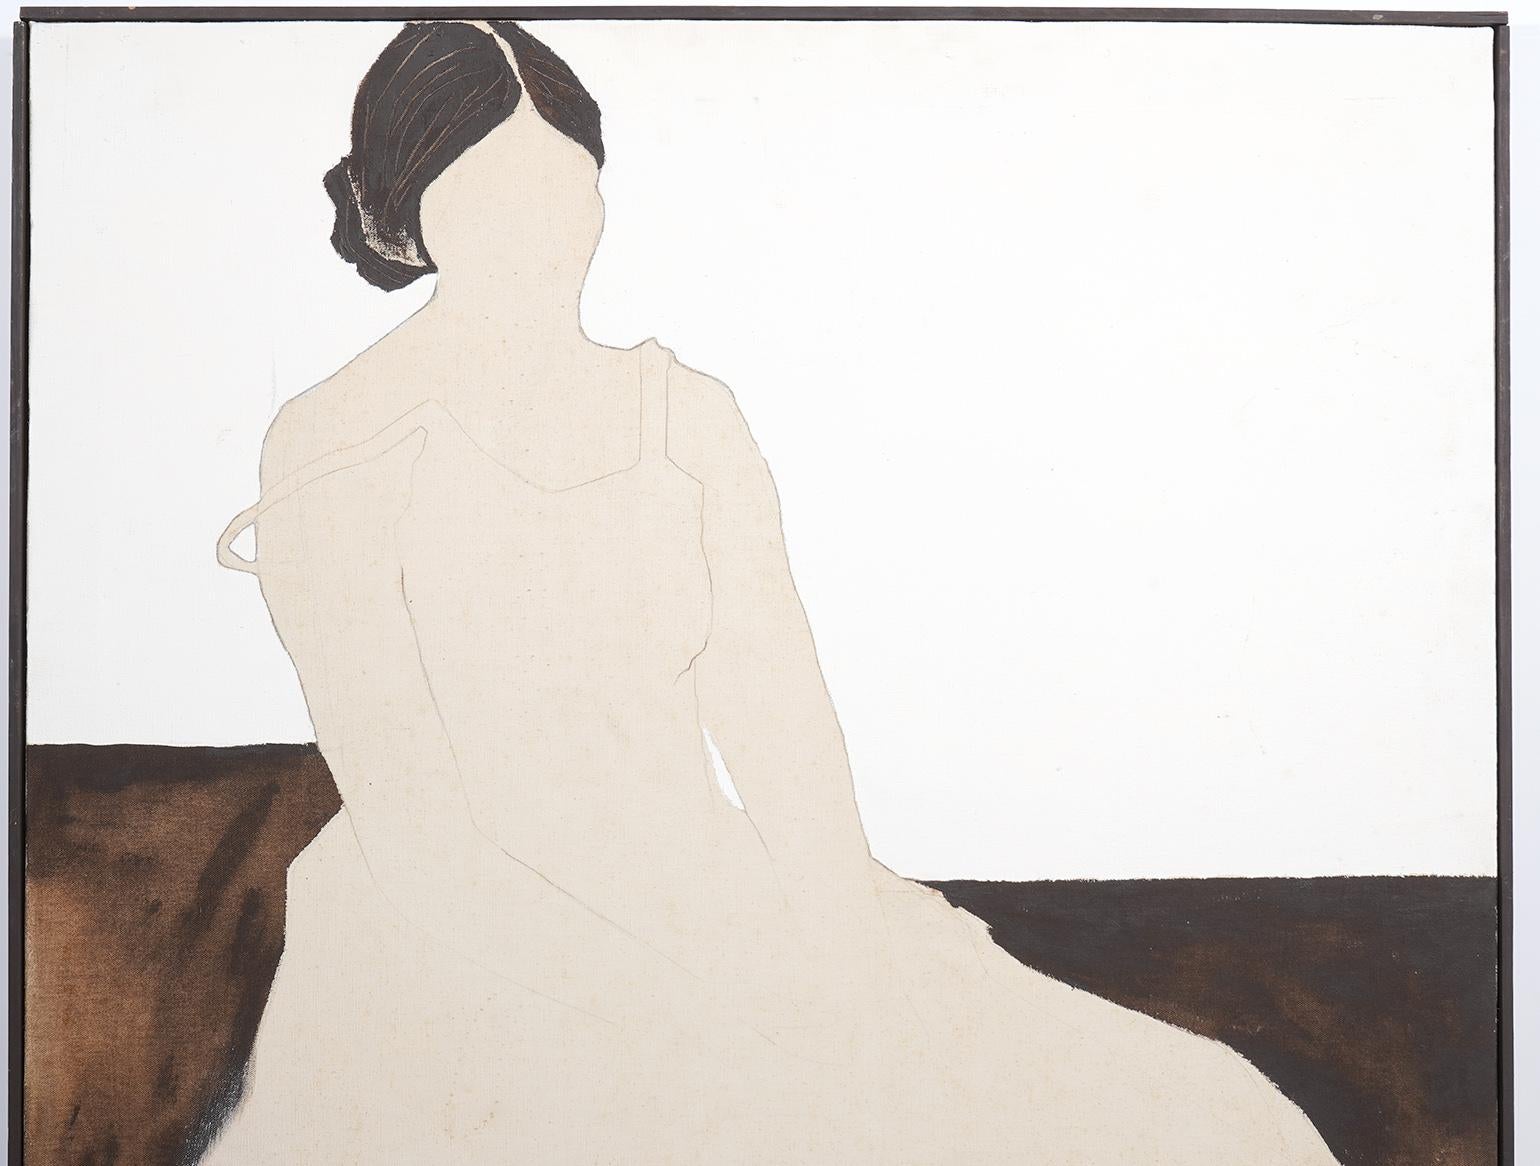 This is a very subtle rendering of a seated beautiful young woman with dark hair wearing a summer dress. It is Minimalist in its character but the viewer adds details in the mind to complete and understand everything.